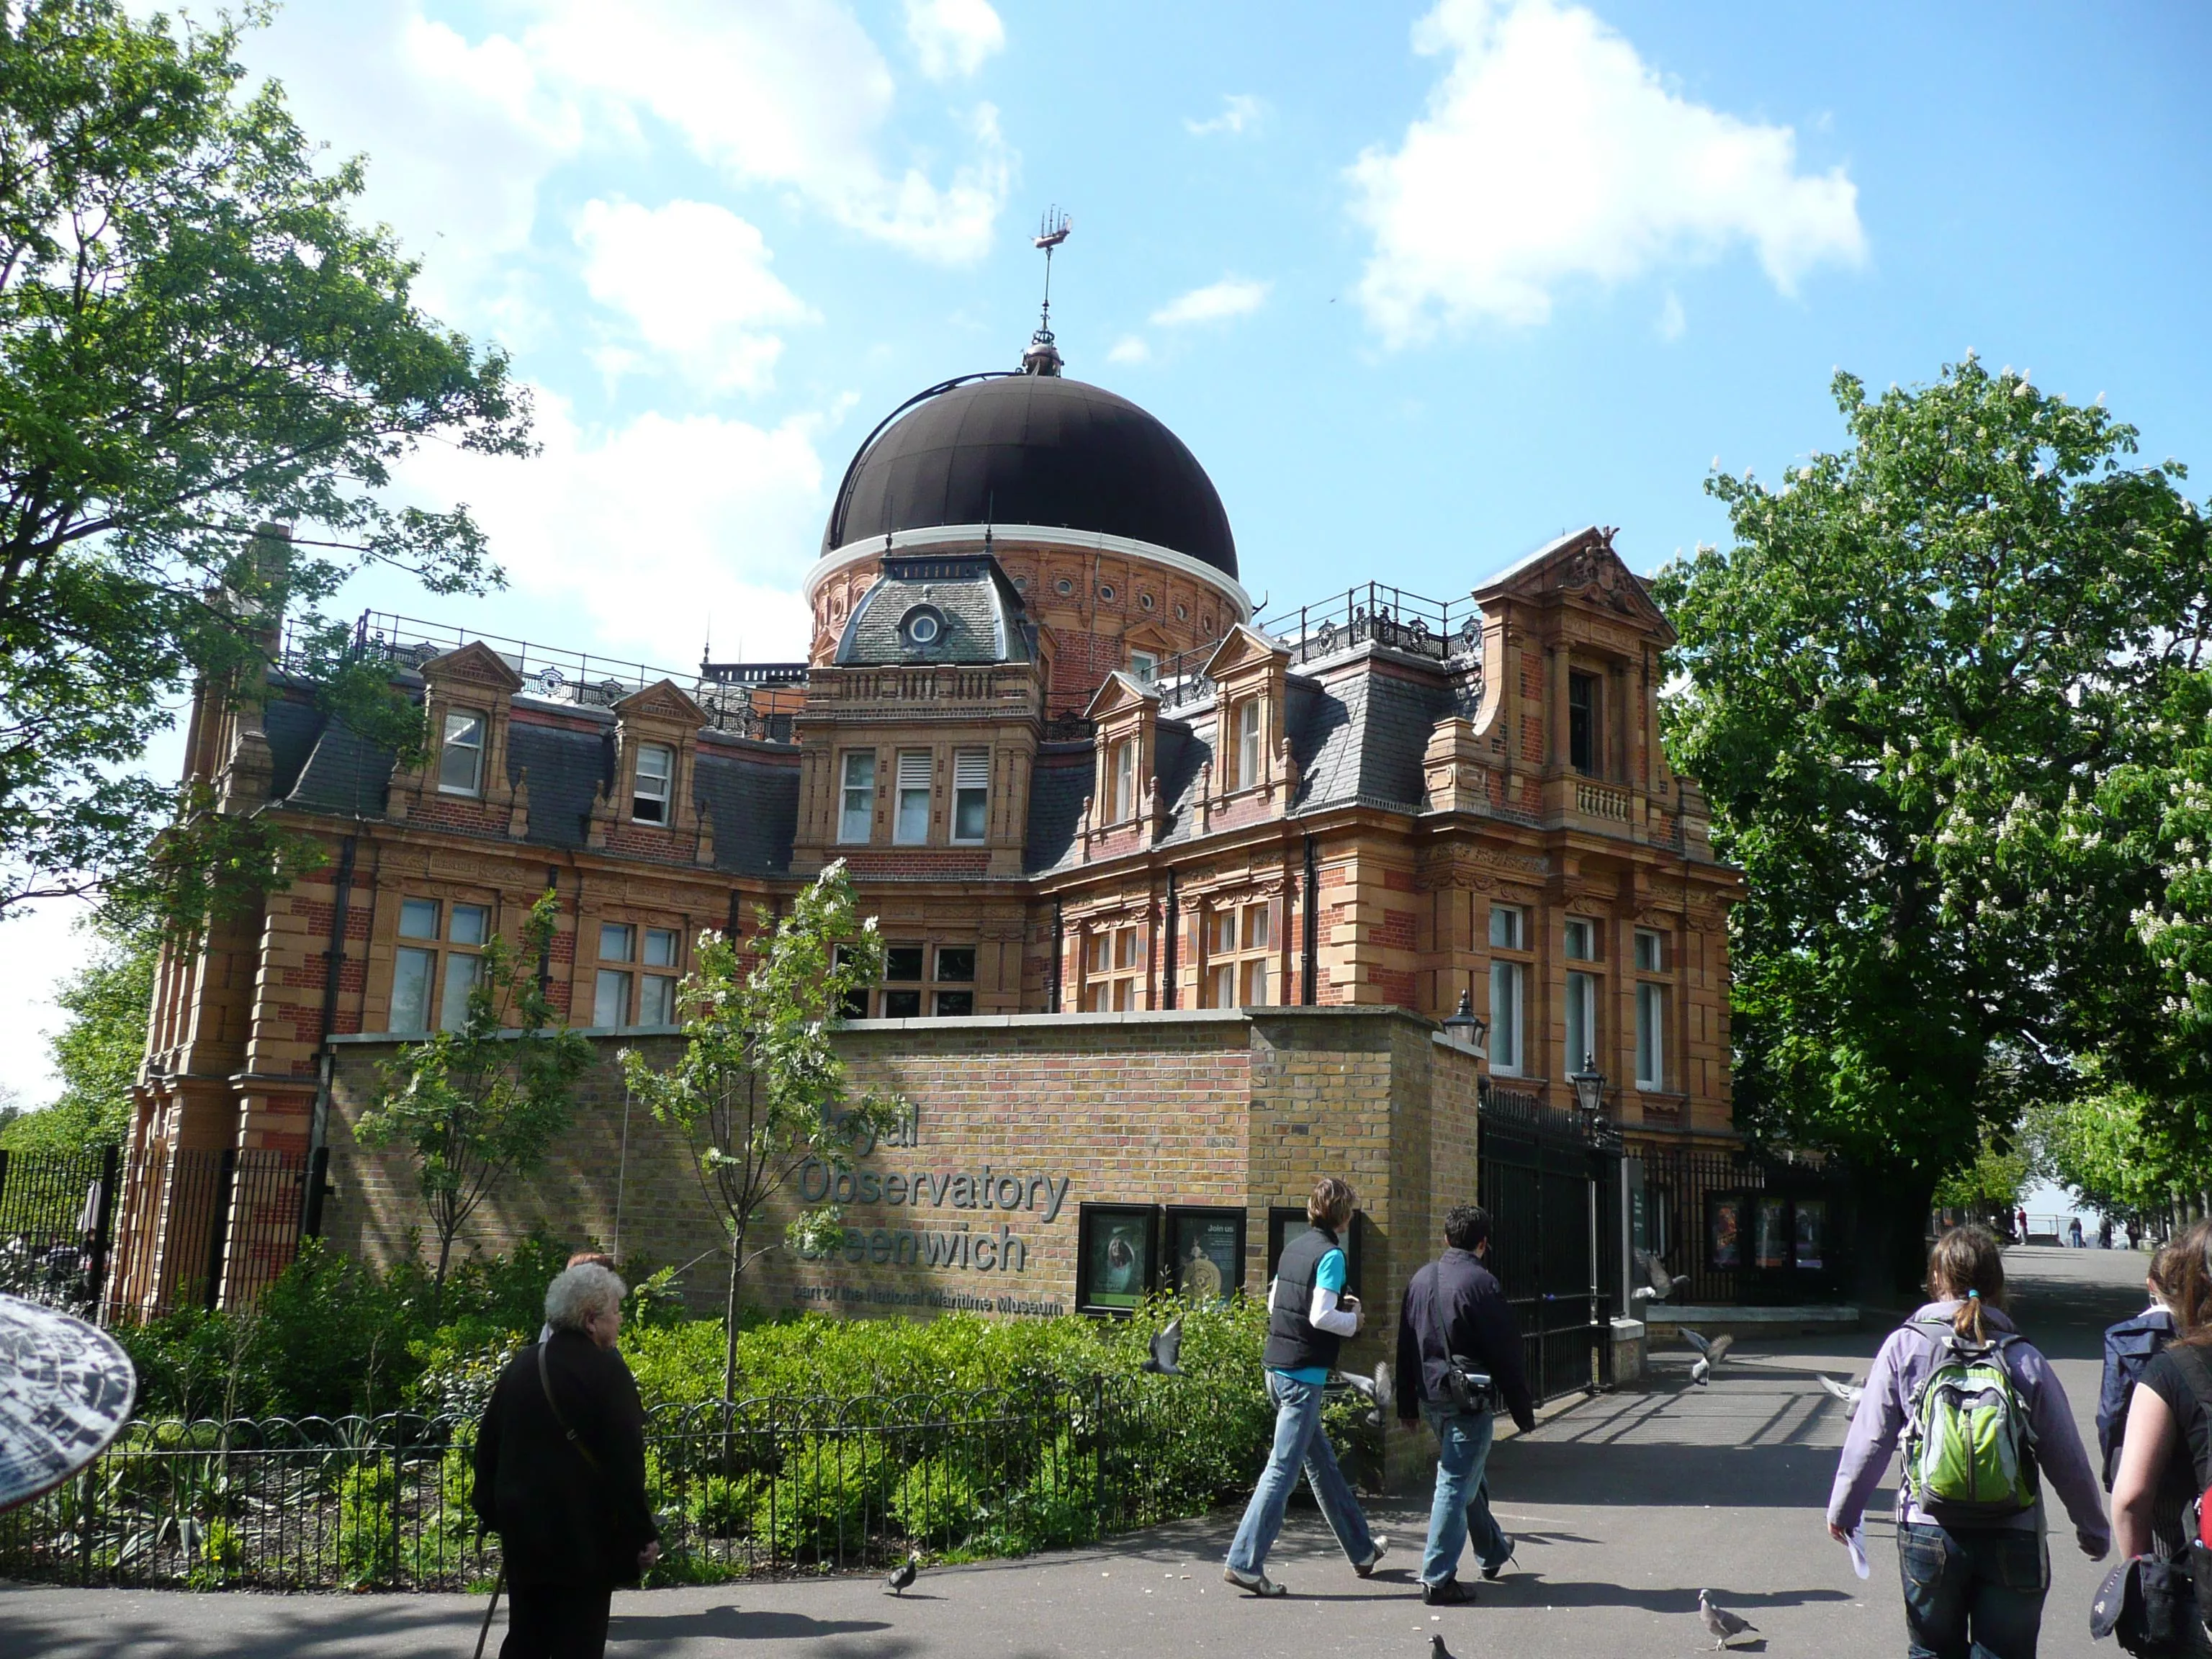 Greenwich Royal in United Kingdom, Europe | Observatories & Planetariums - Rated 7